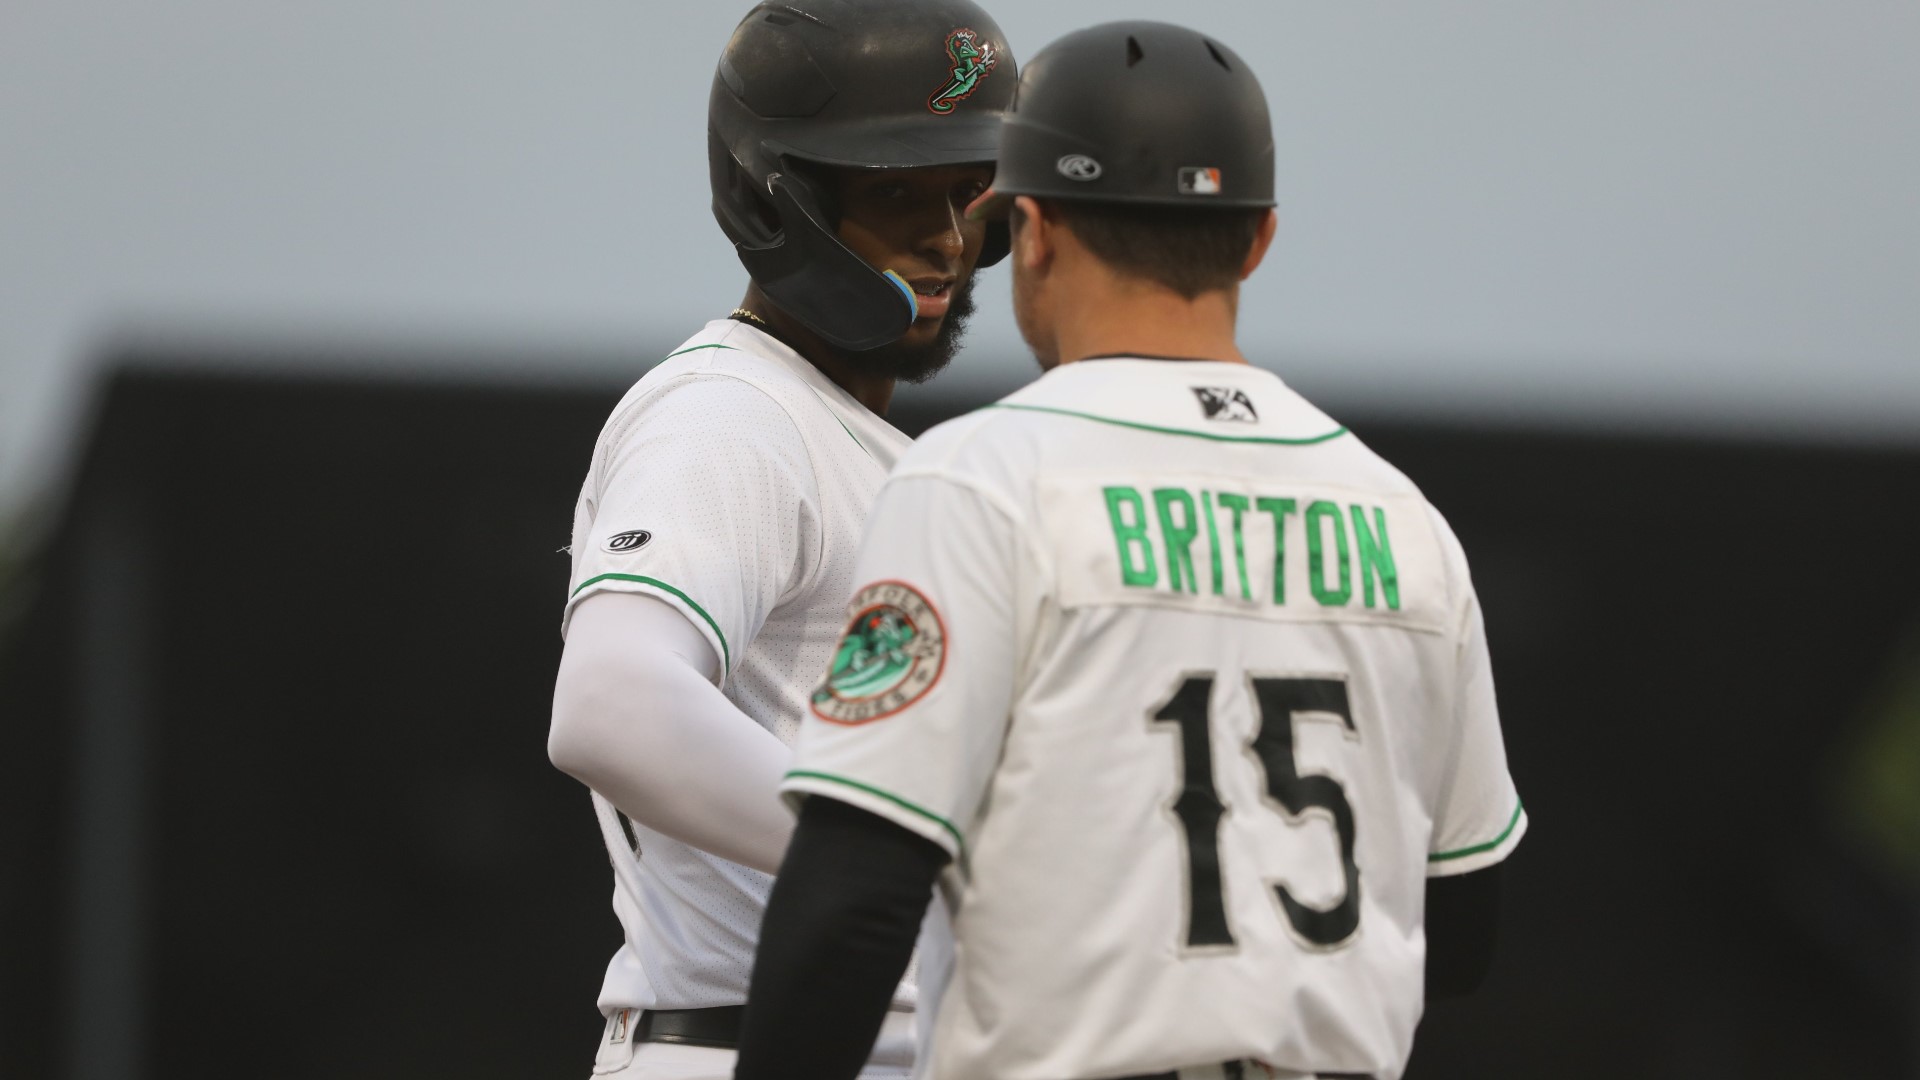 The bats would go silent in the following innings until Lewin Díaz put a jolt into one in the ninth to tie the game with a solo home run to right field.